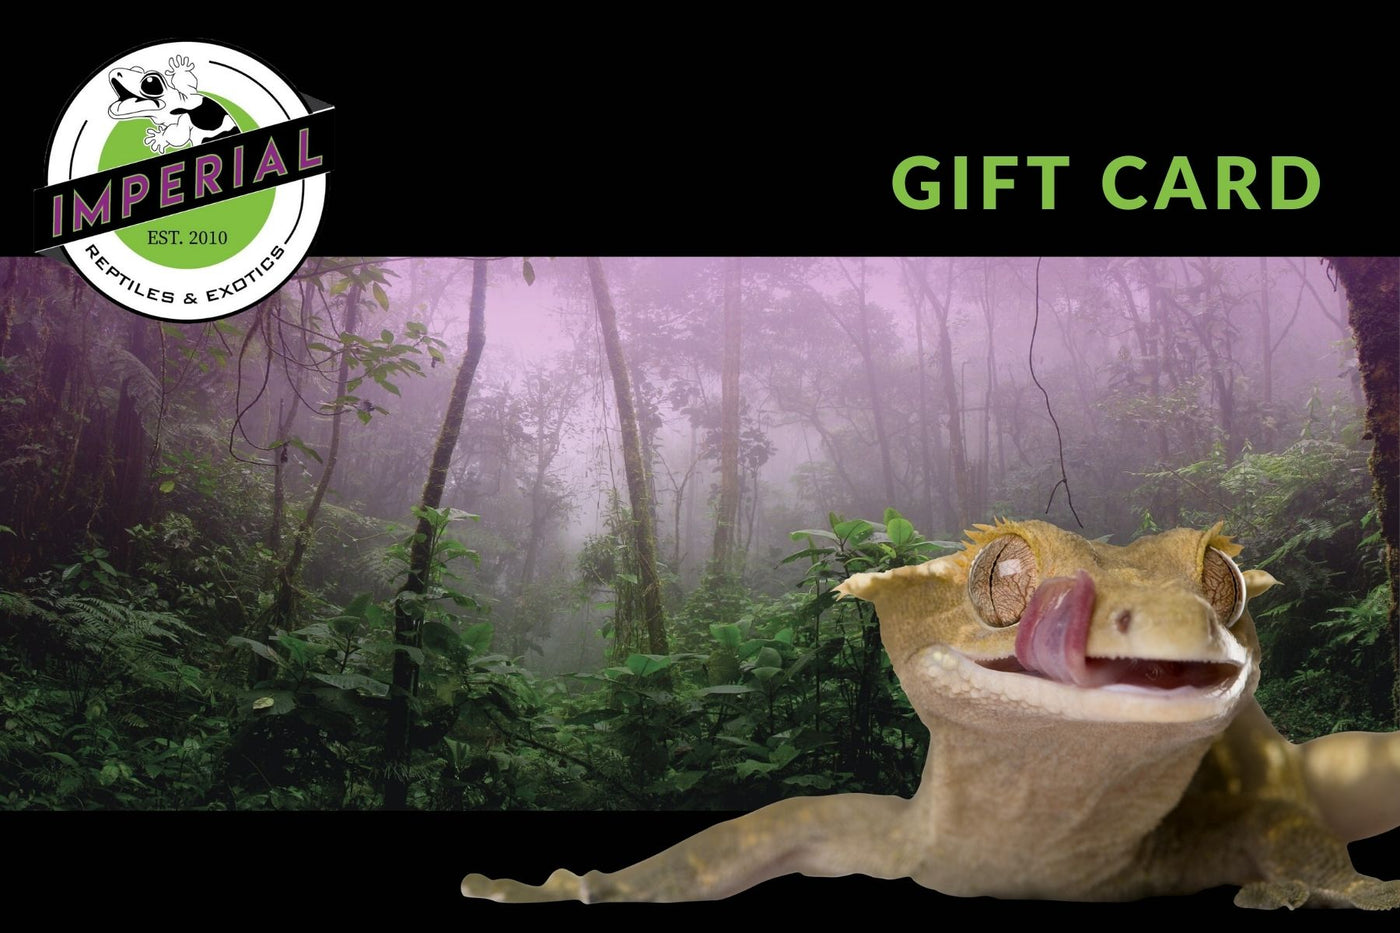 Imperial Reptiles & Exotics Gift Card